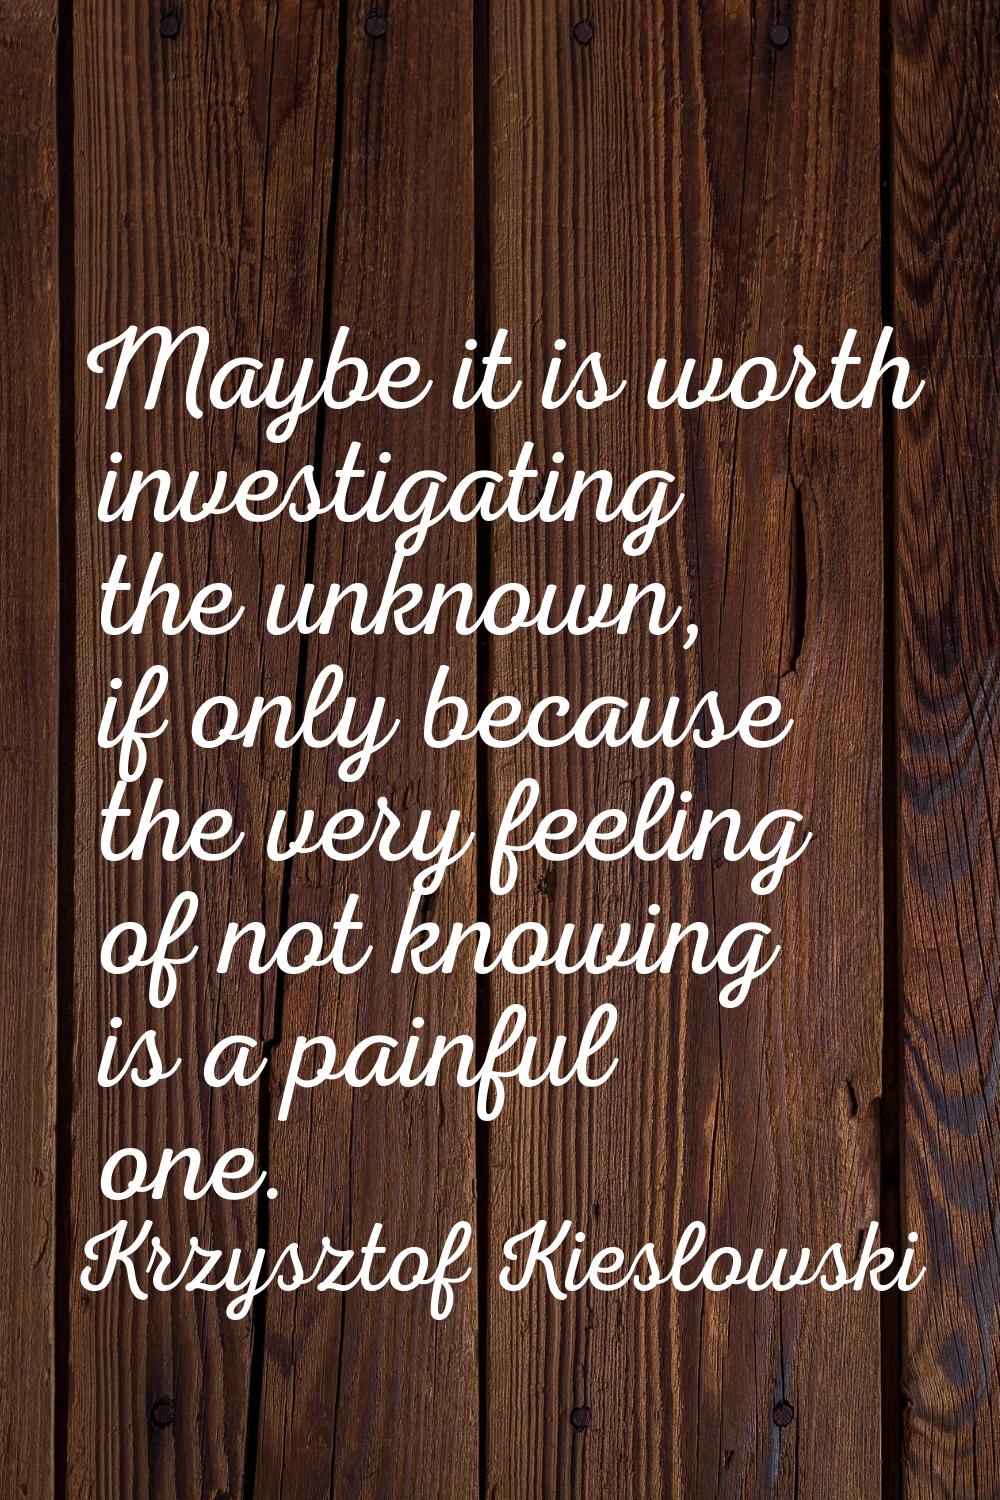 Maybe it is worth investigating the unknown, if only because the very feeling of not knowing is a p